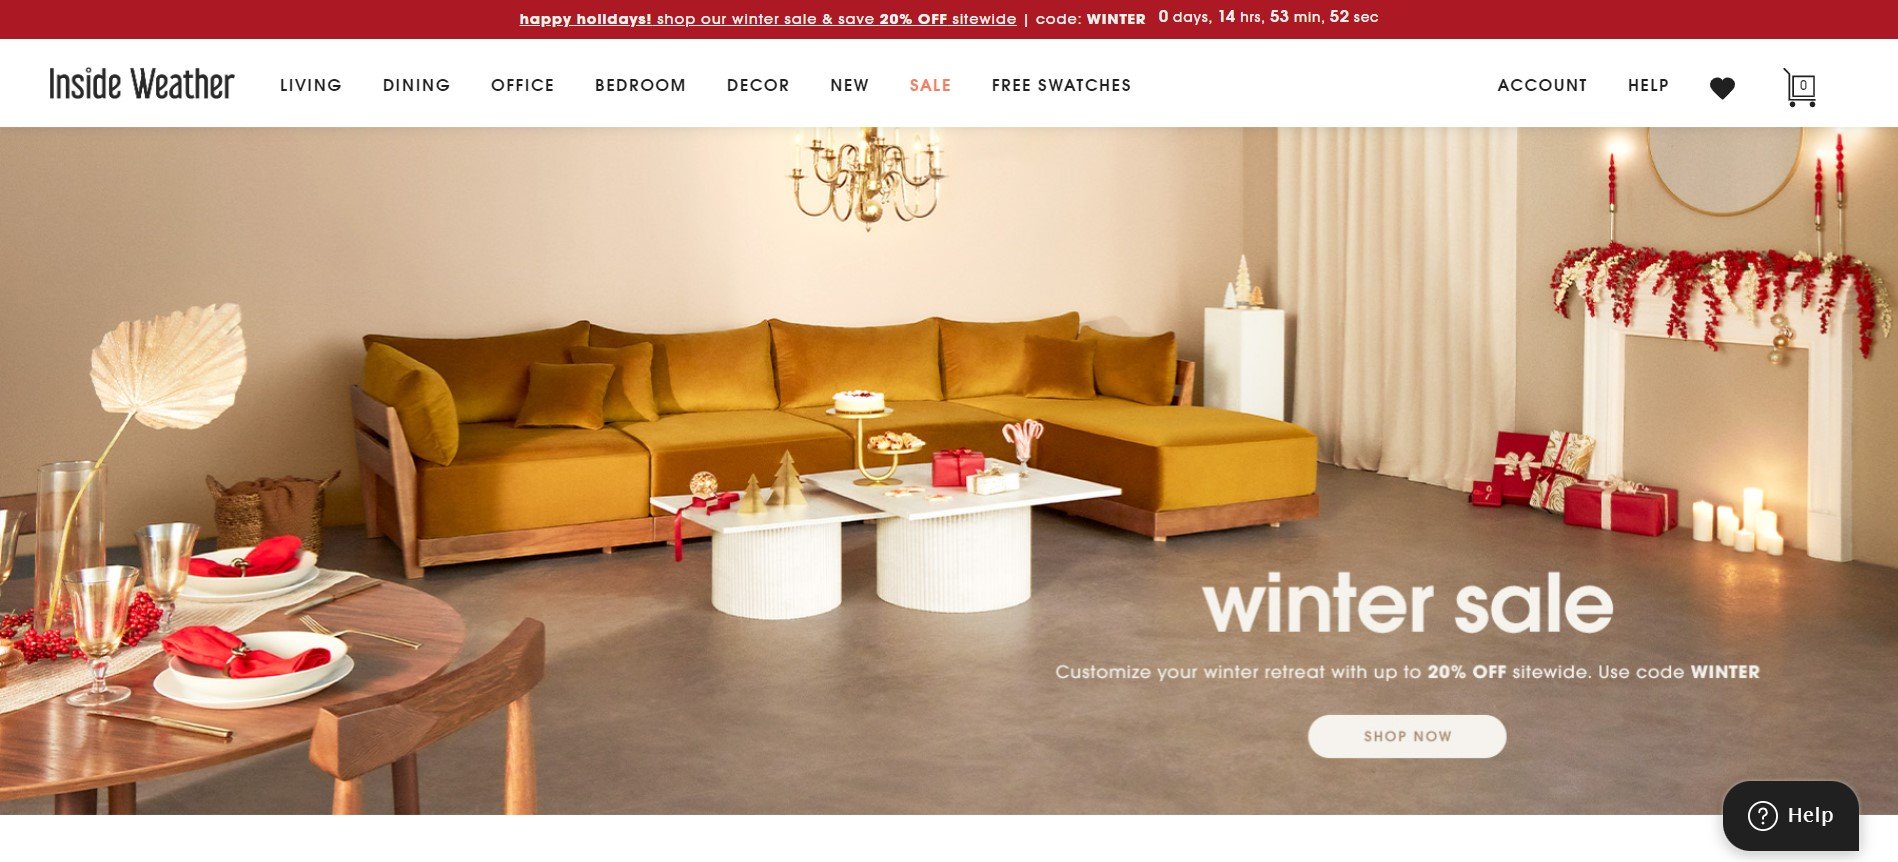 Shopify furniture stores: Inside Weather